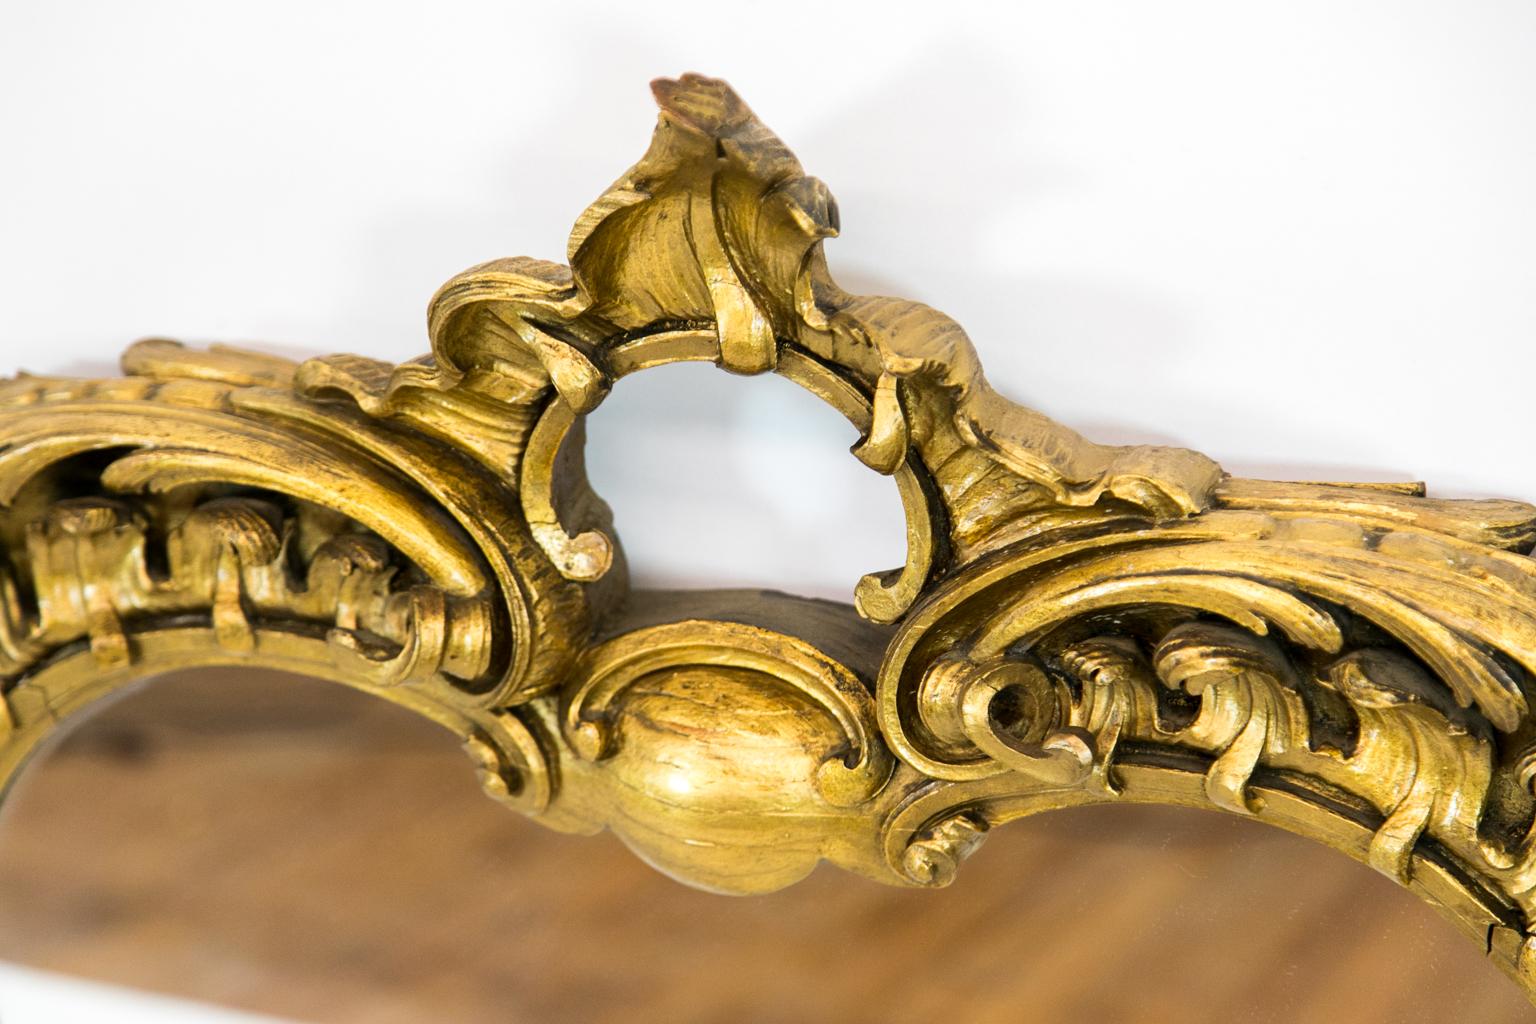 Shaped gilt Rococo mirror is framed with stylized waves carved in high relief. It has a flame crest and a fluted, voluted base.